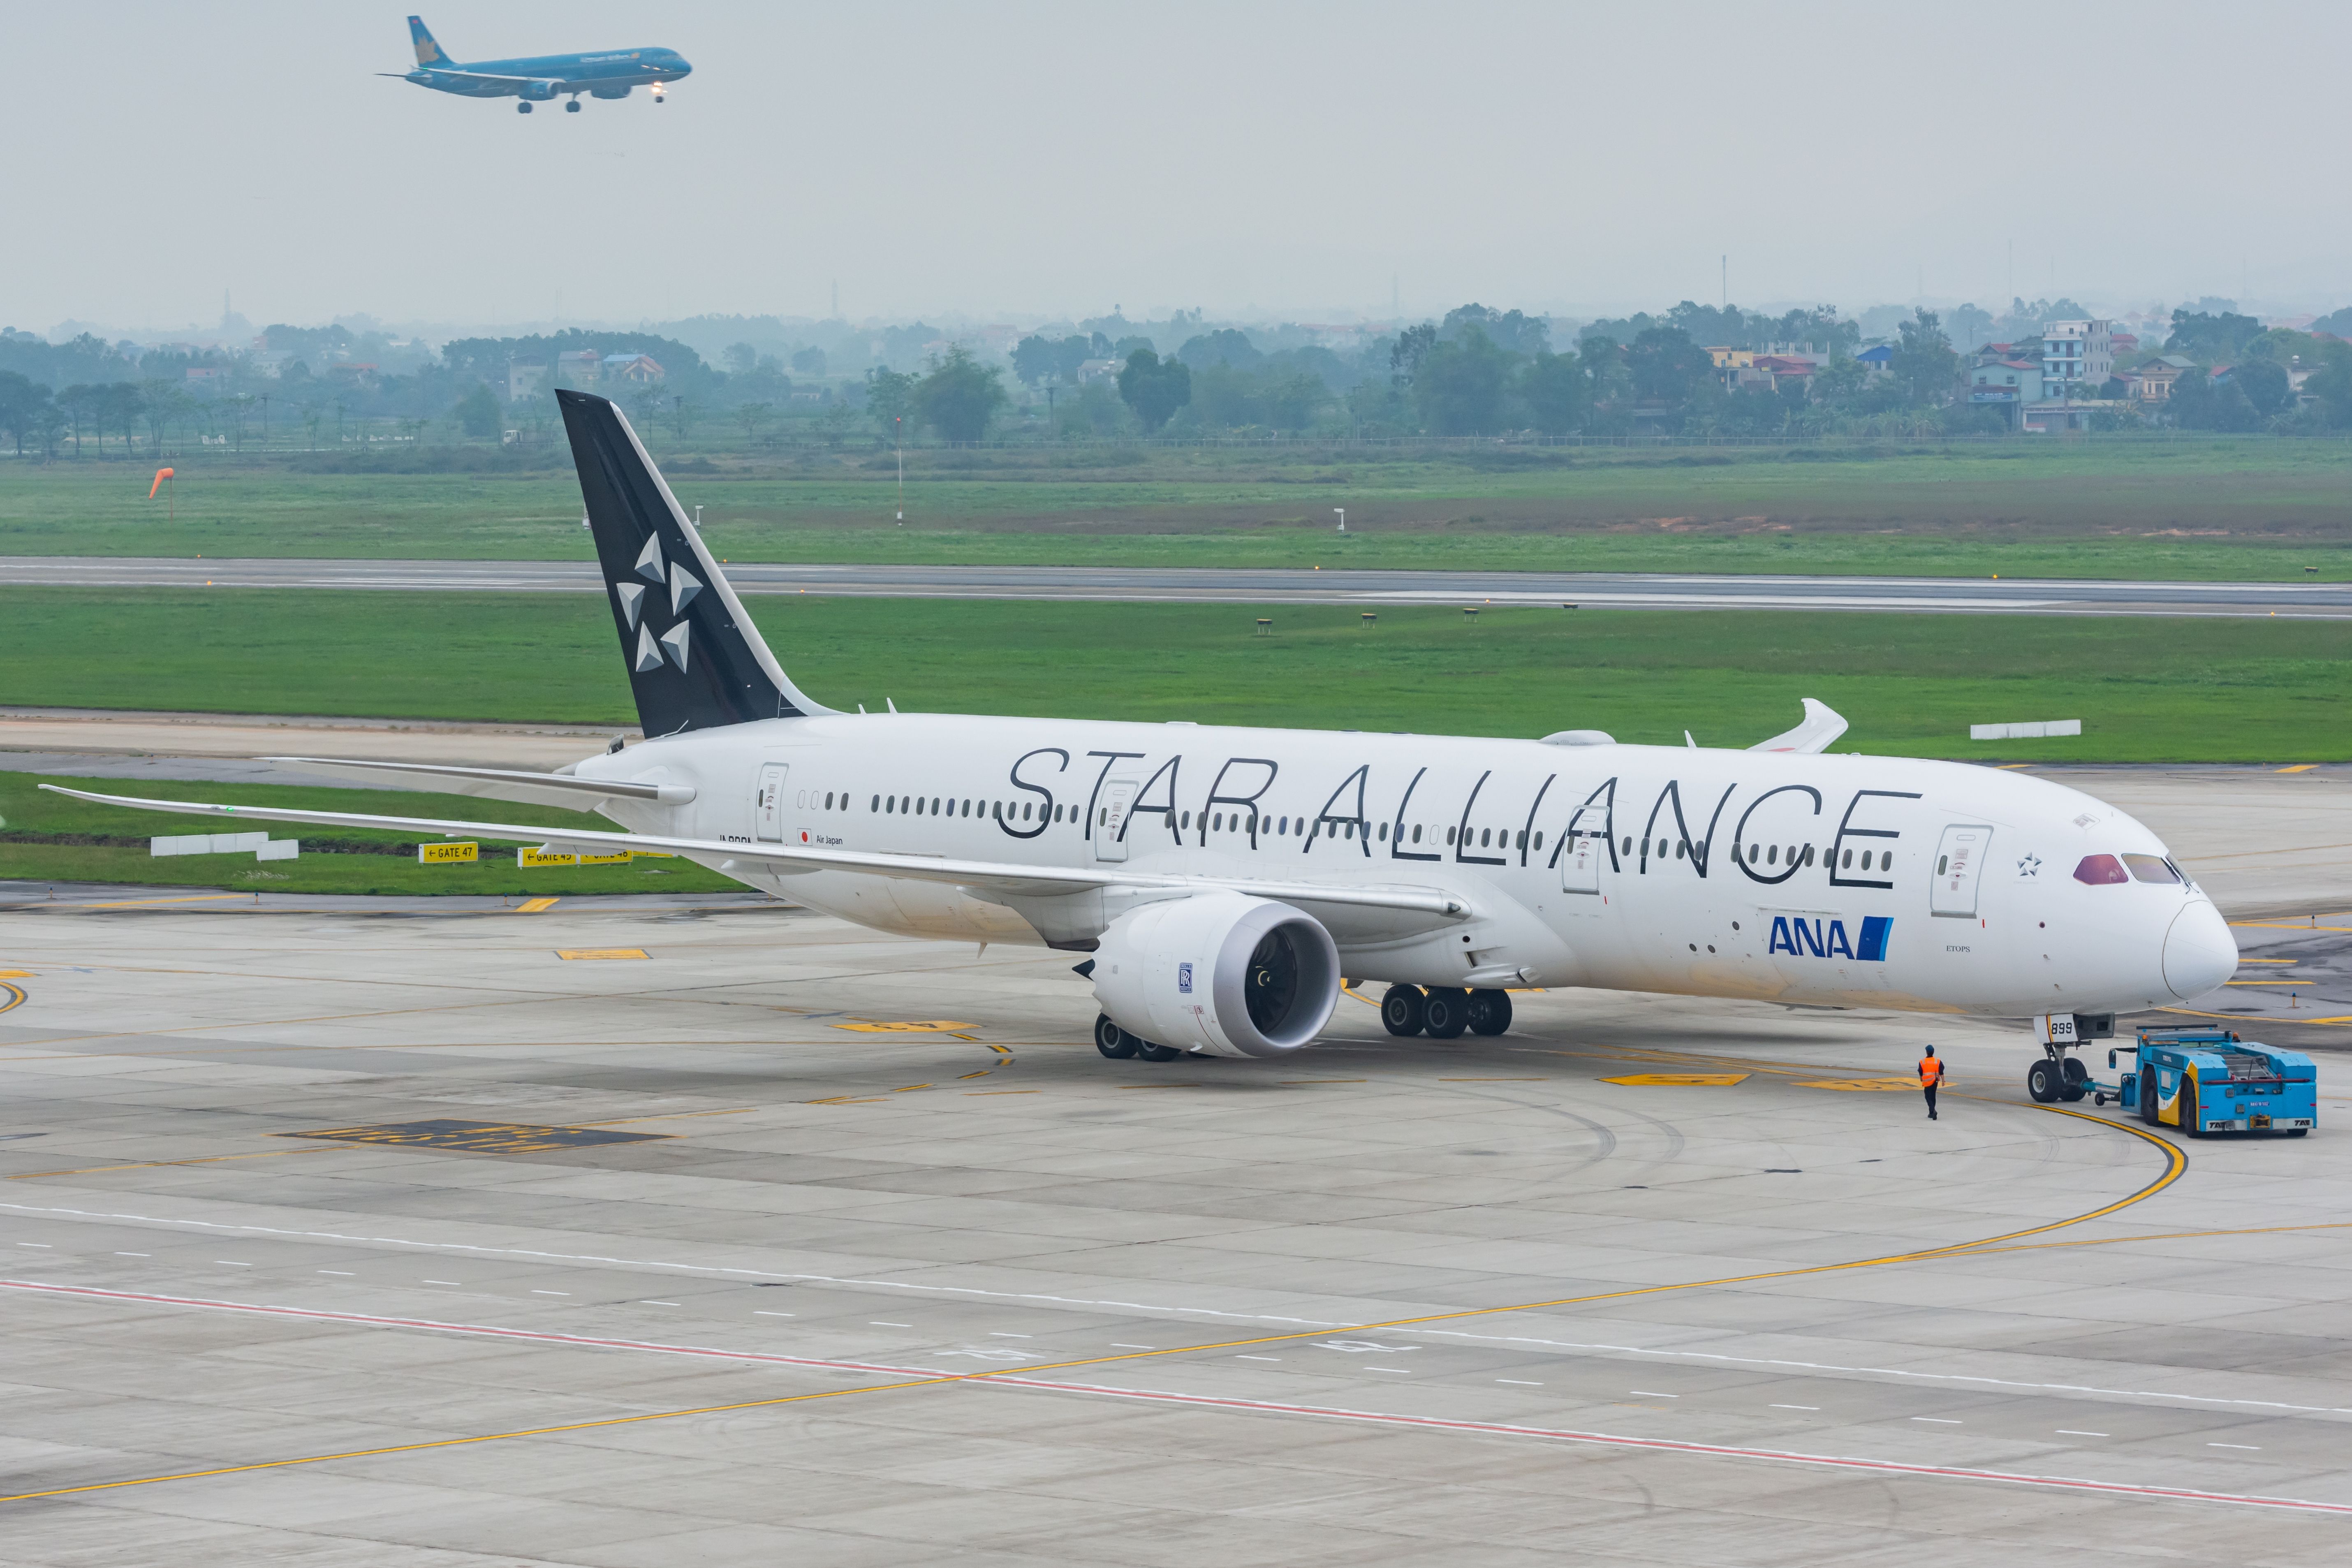 All Nippon Airways ANA in Star Alliance livery being pushed back at Noi Bai International Airport (HAN).